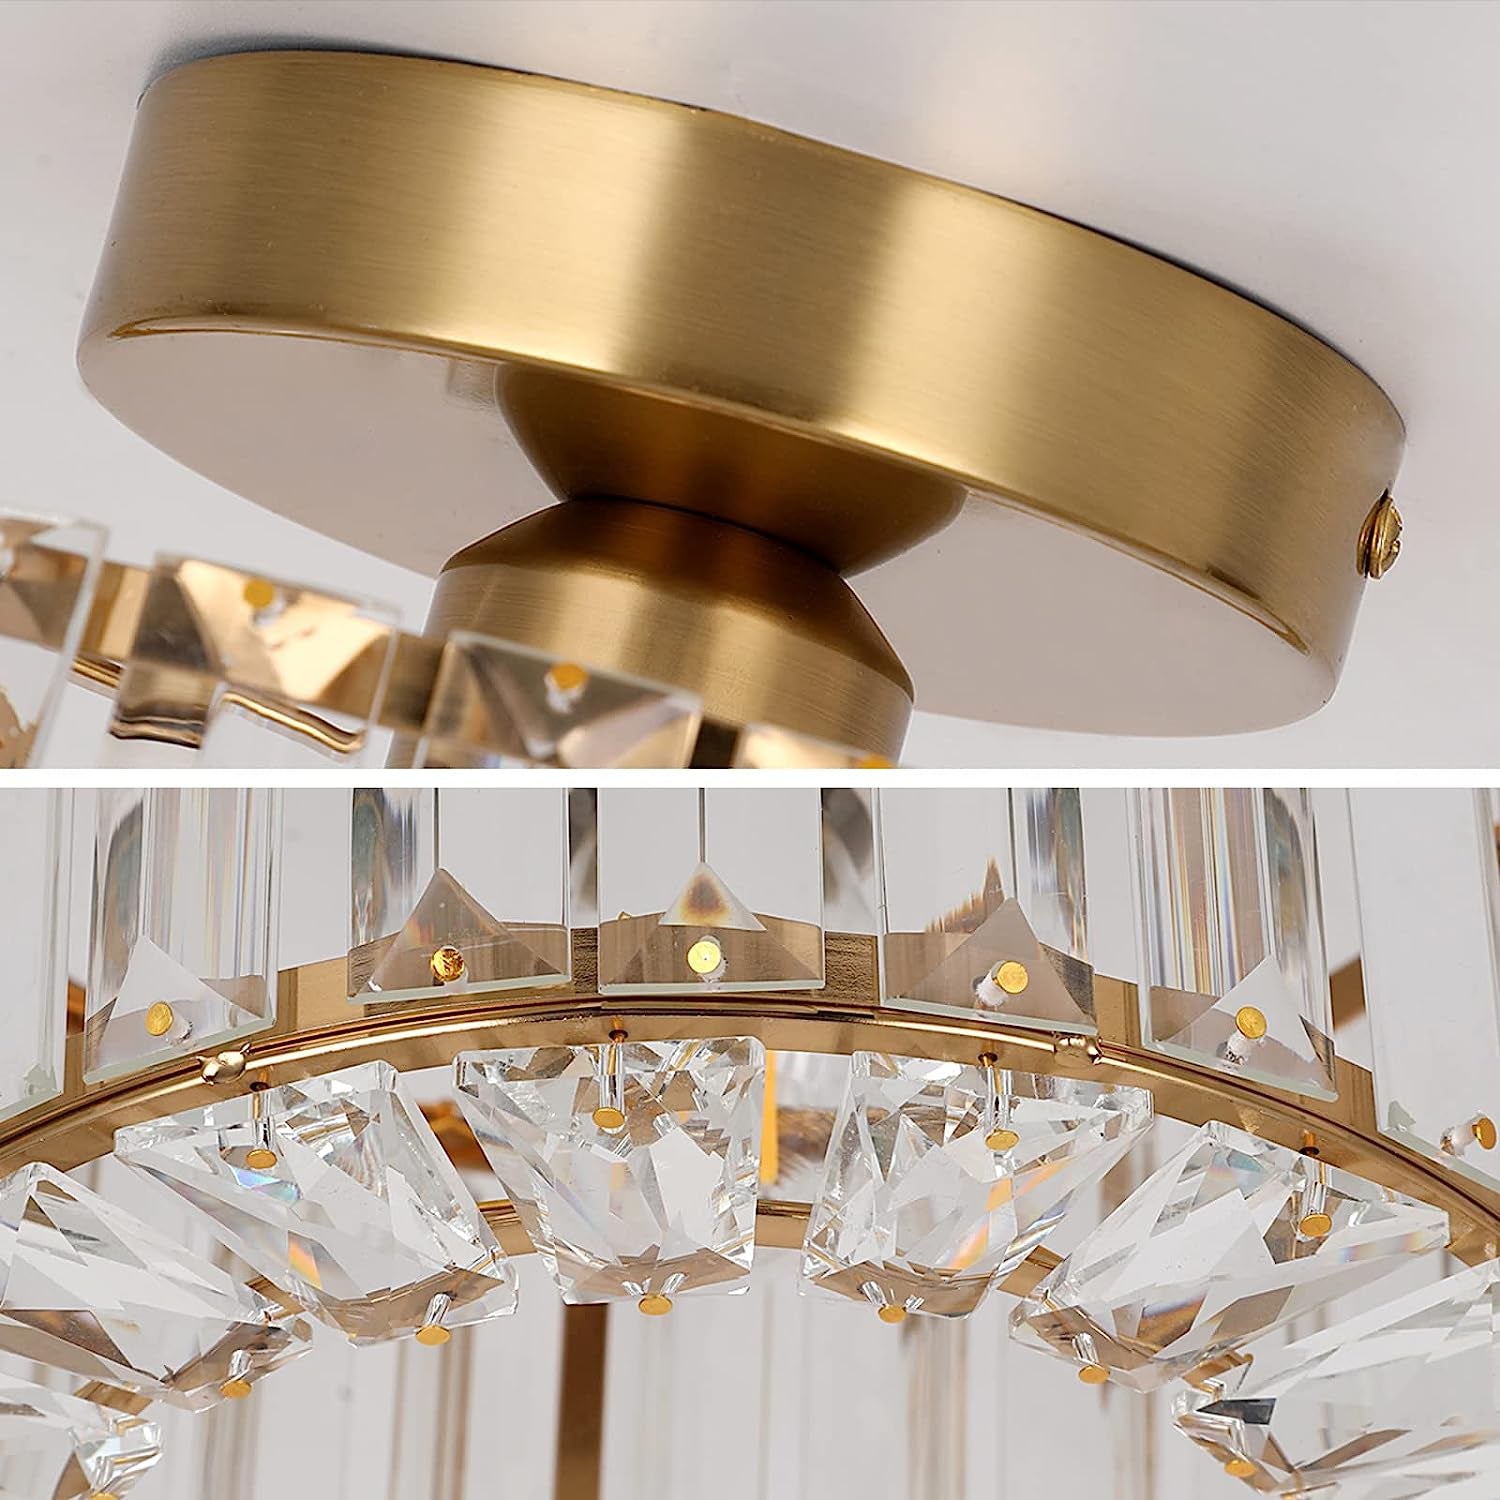 Diamonds on Display: Ceiling Chandelier with Cascading Crystals